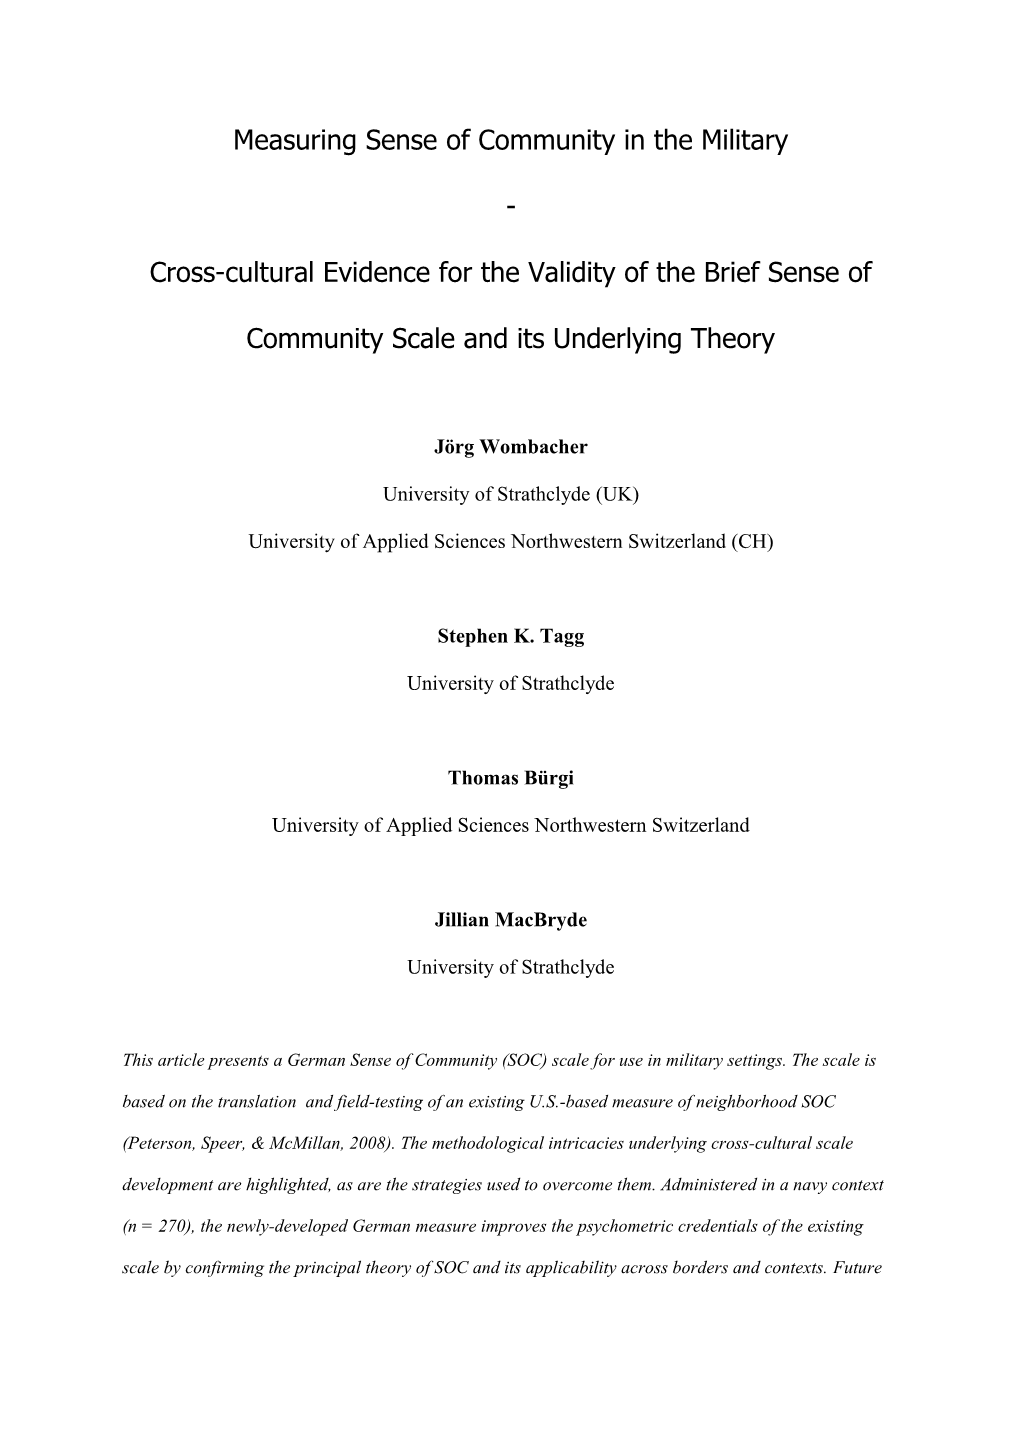 Cross-Cultural Evidence for the Validity of the Brief Sense of Community Scale